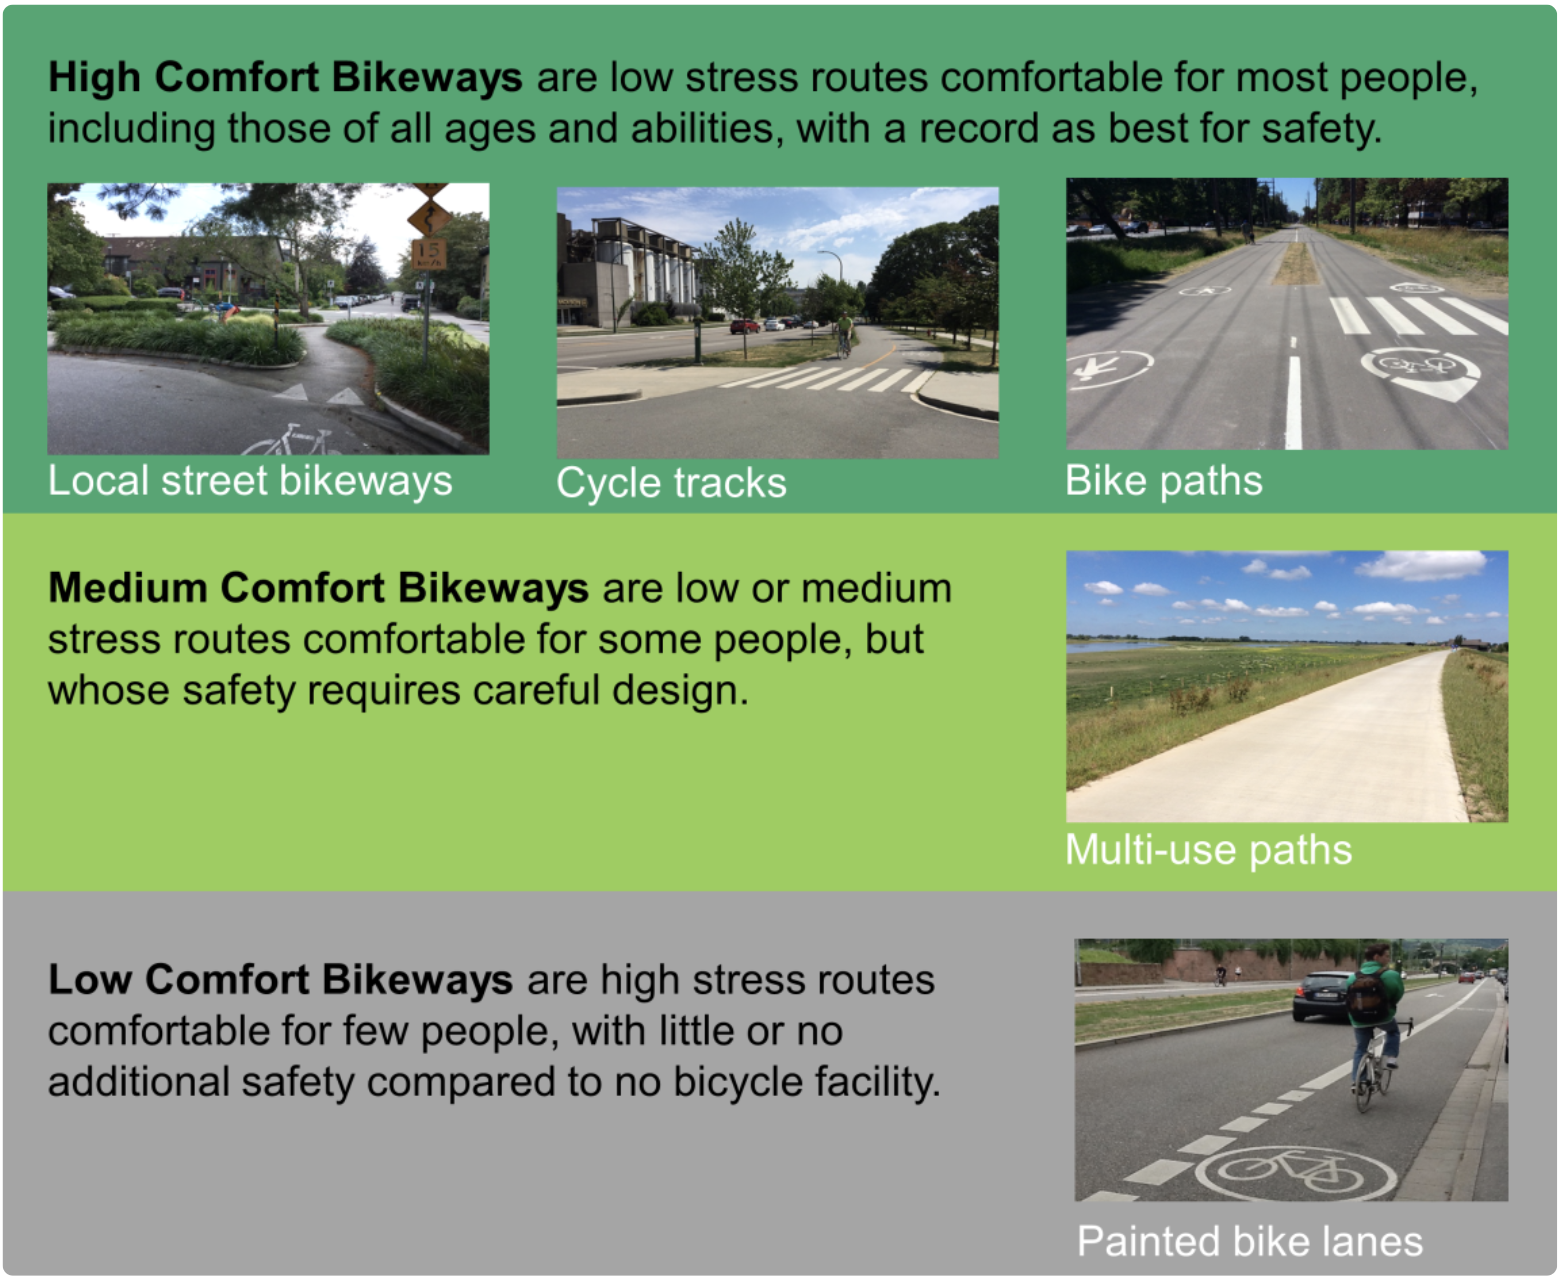 Figure 1 - The Canadian Bikeway Comfort and Safety (Can-BICS) Classification System